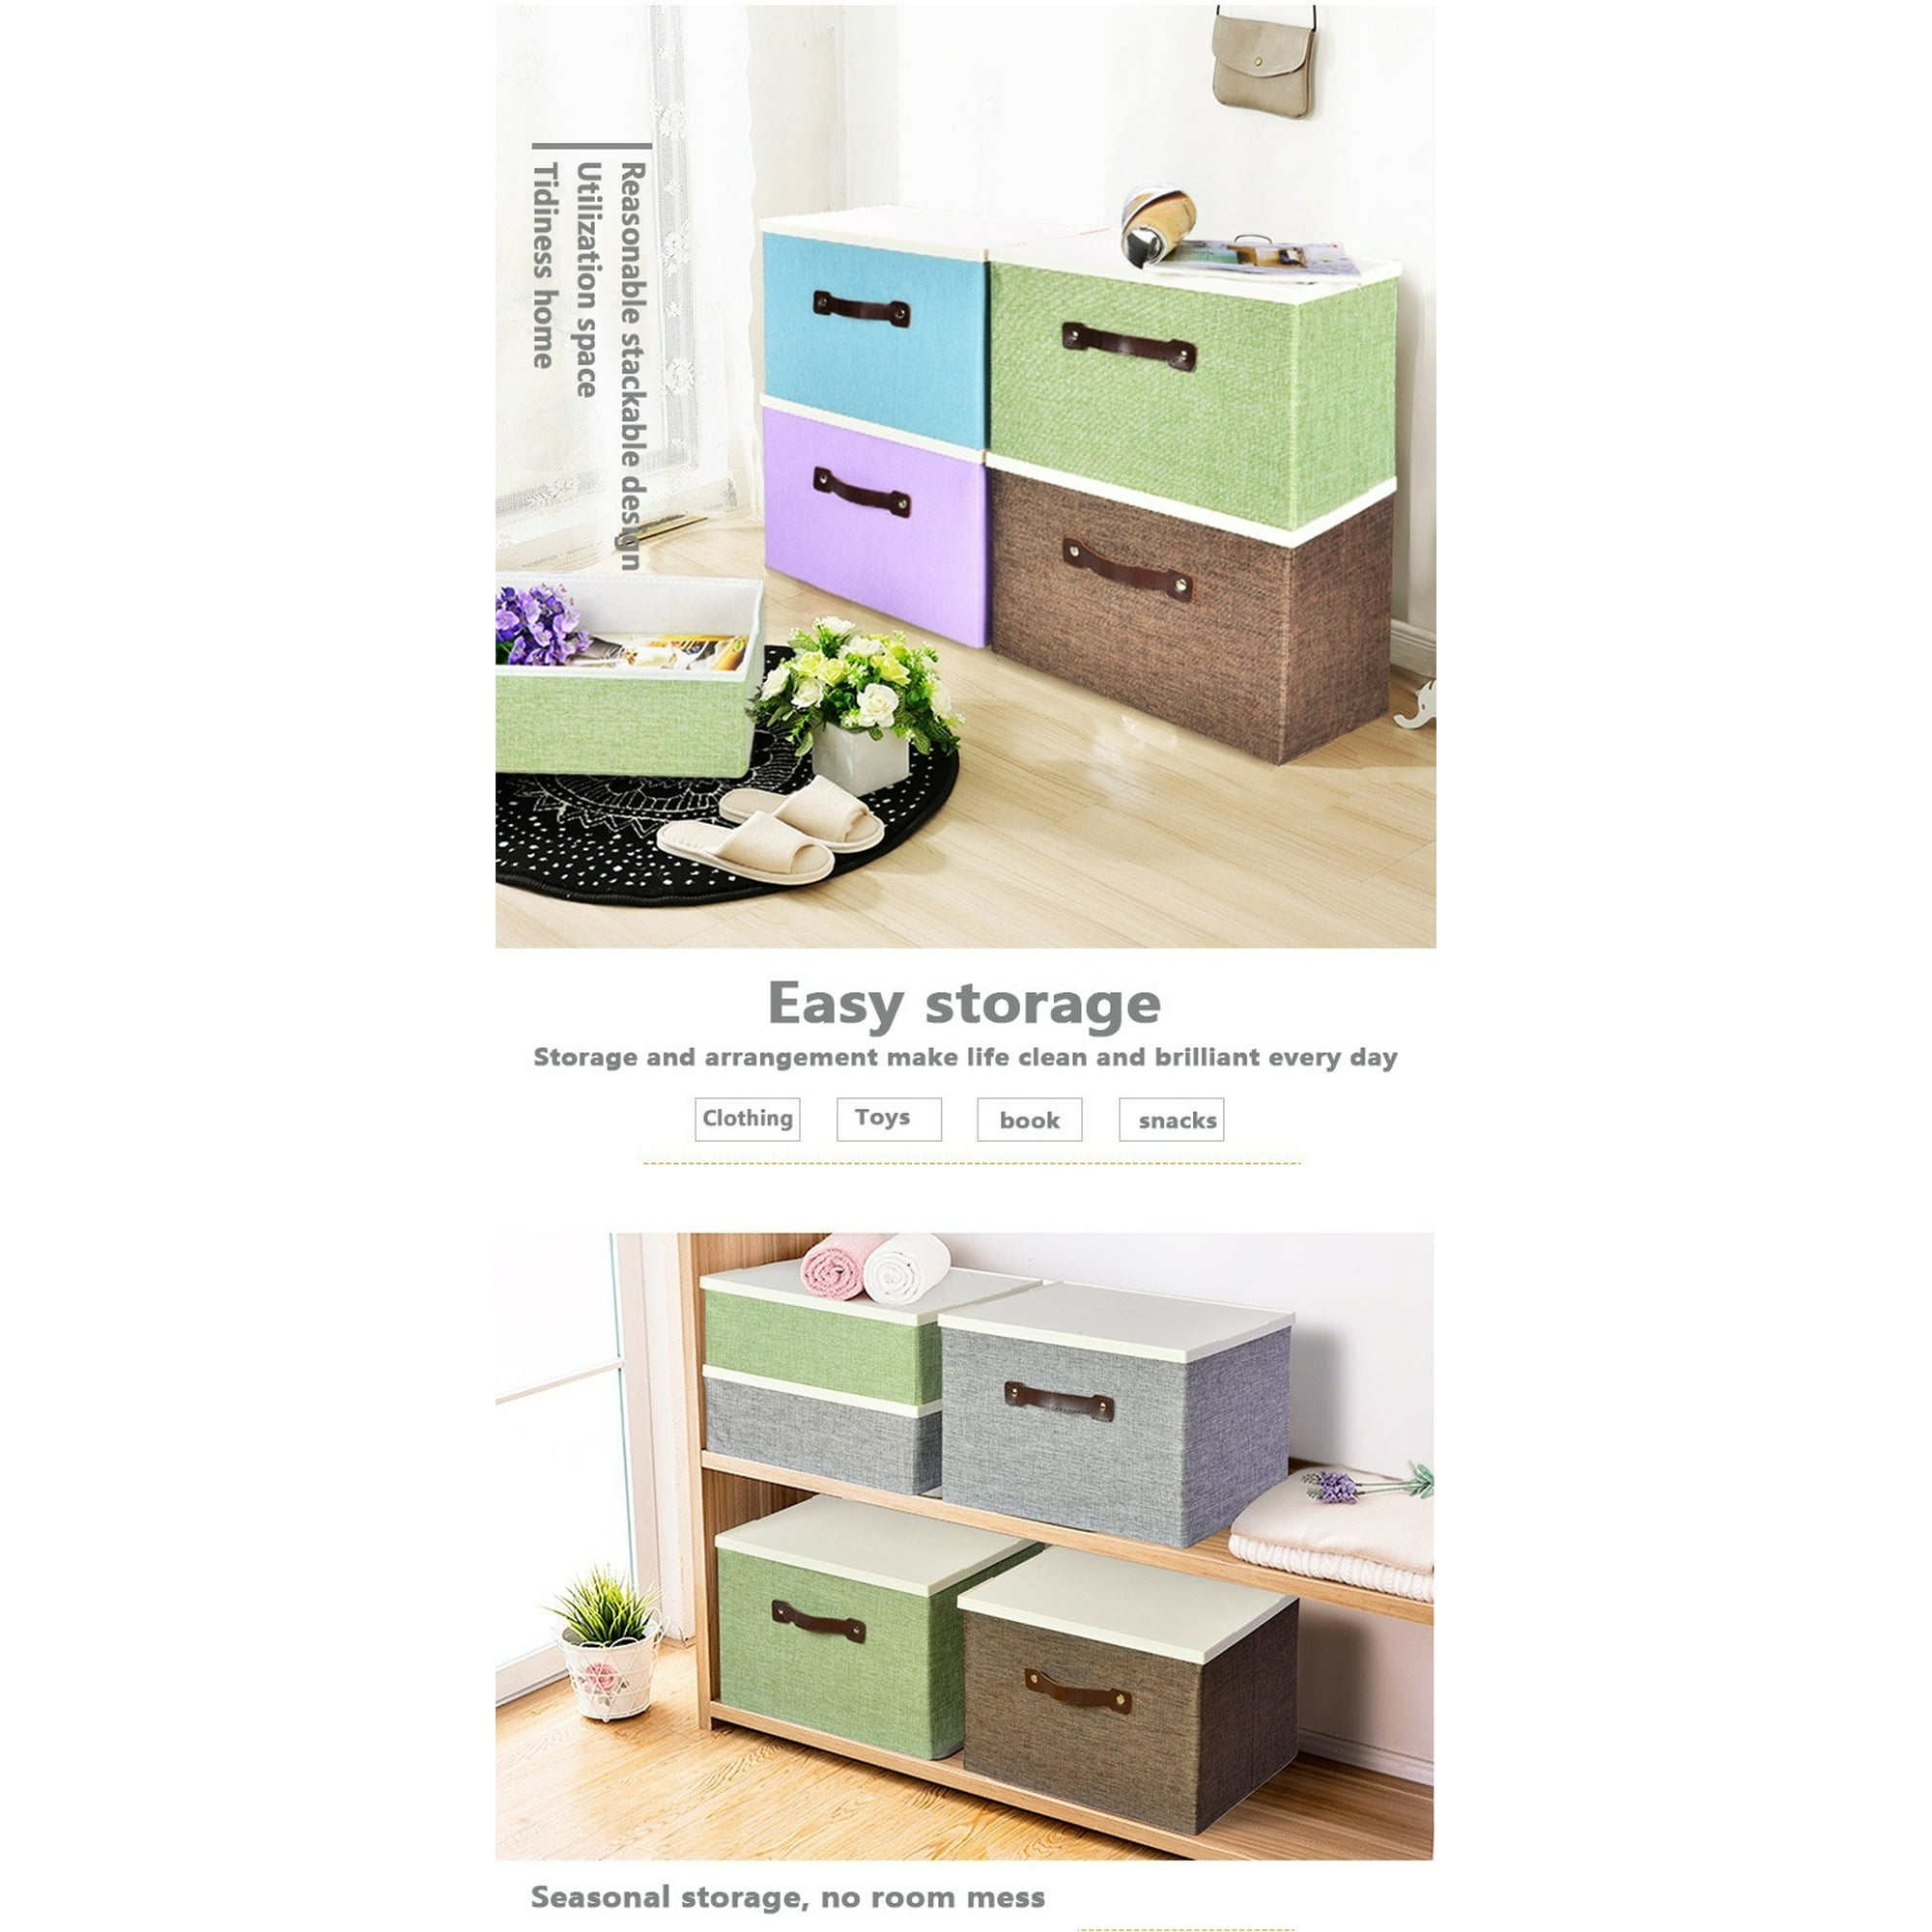 New Storage Bin With Lid Closet, Decorative Storage Boxes With Lids Canada